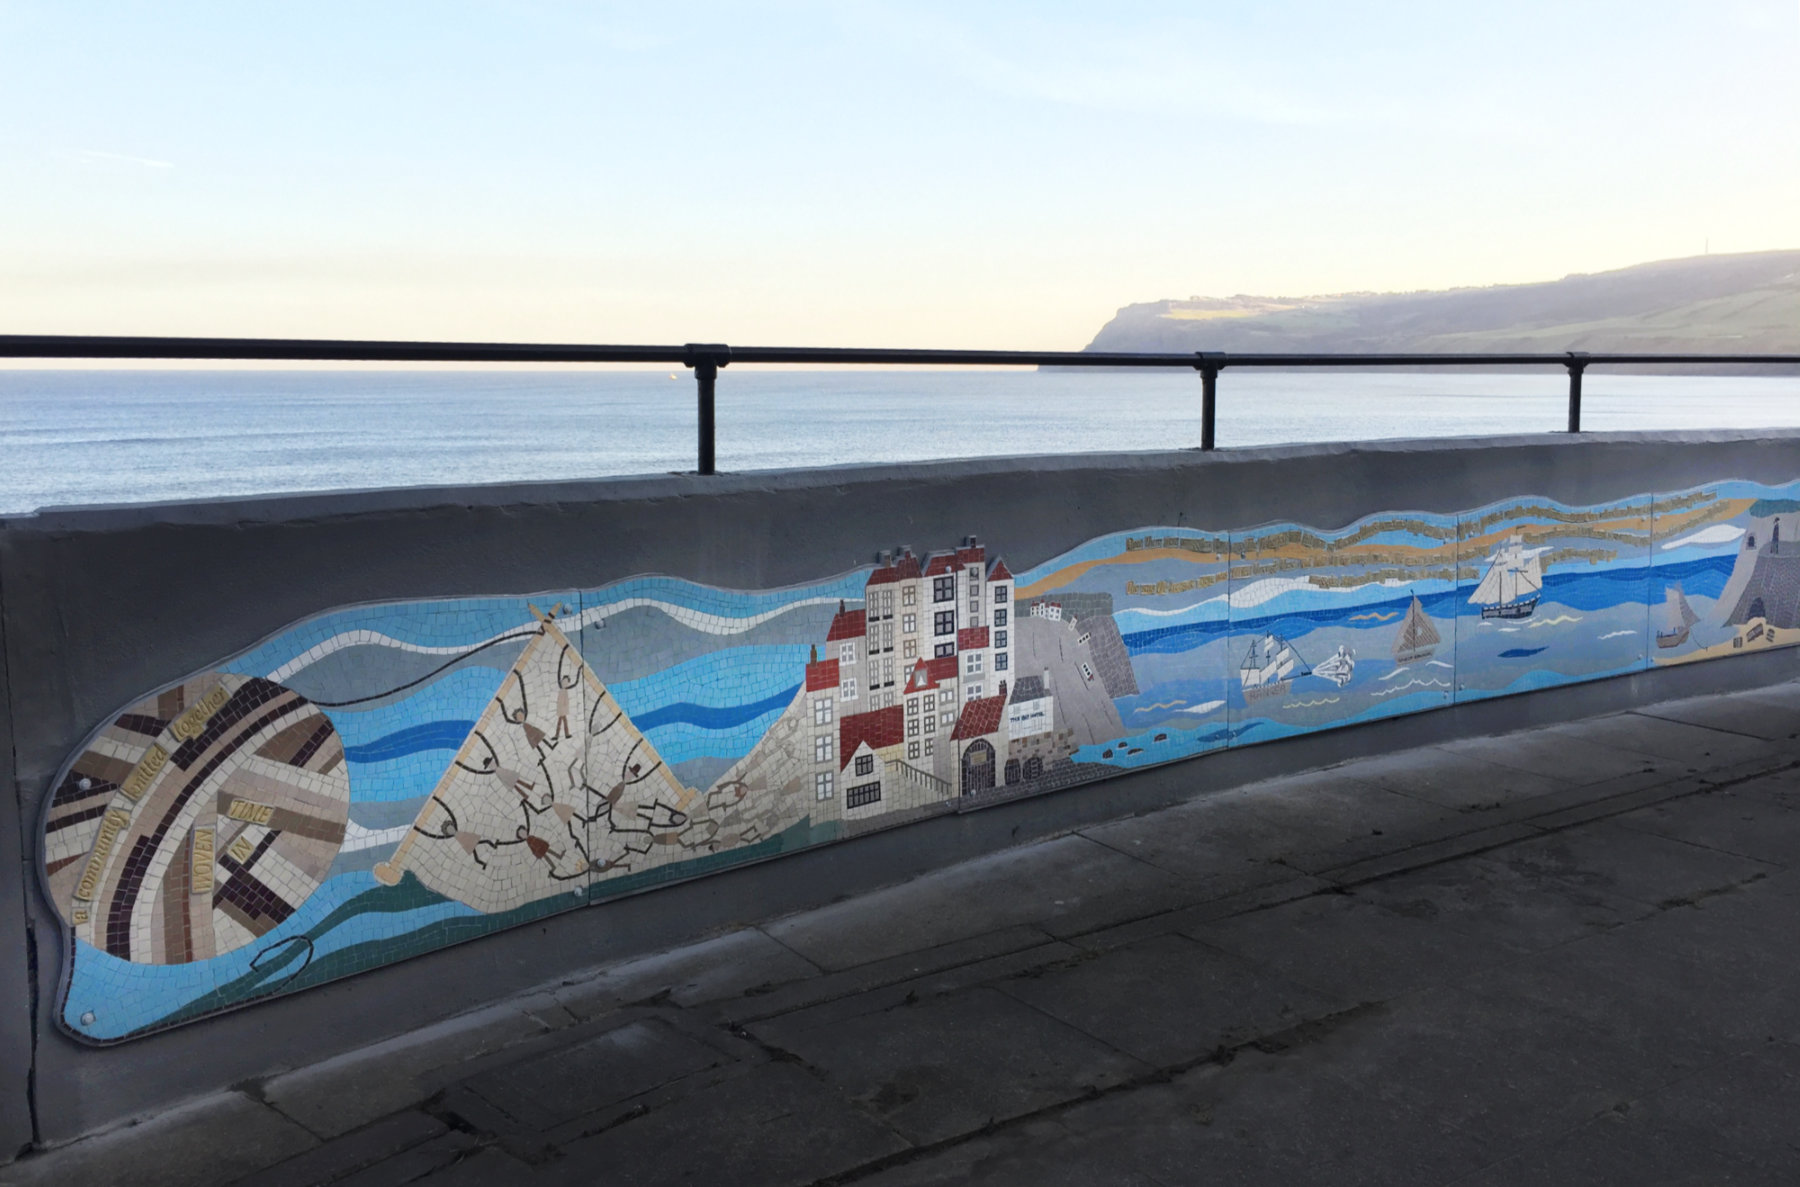 A community knitted together Robin Hood's Bay Mosaic Sea Wall